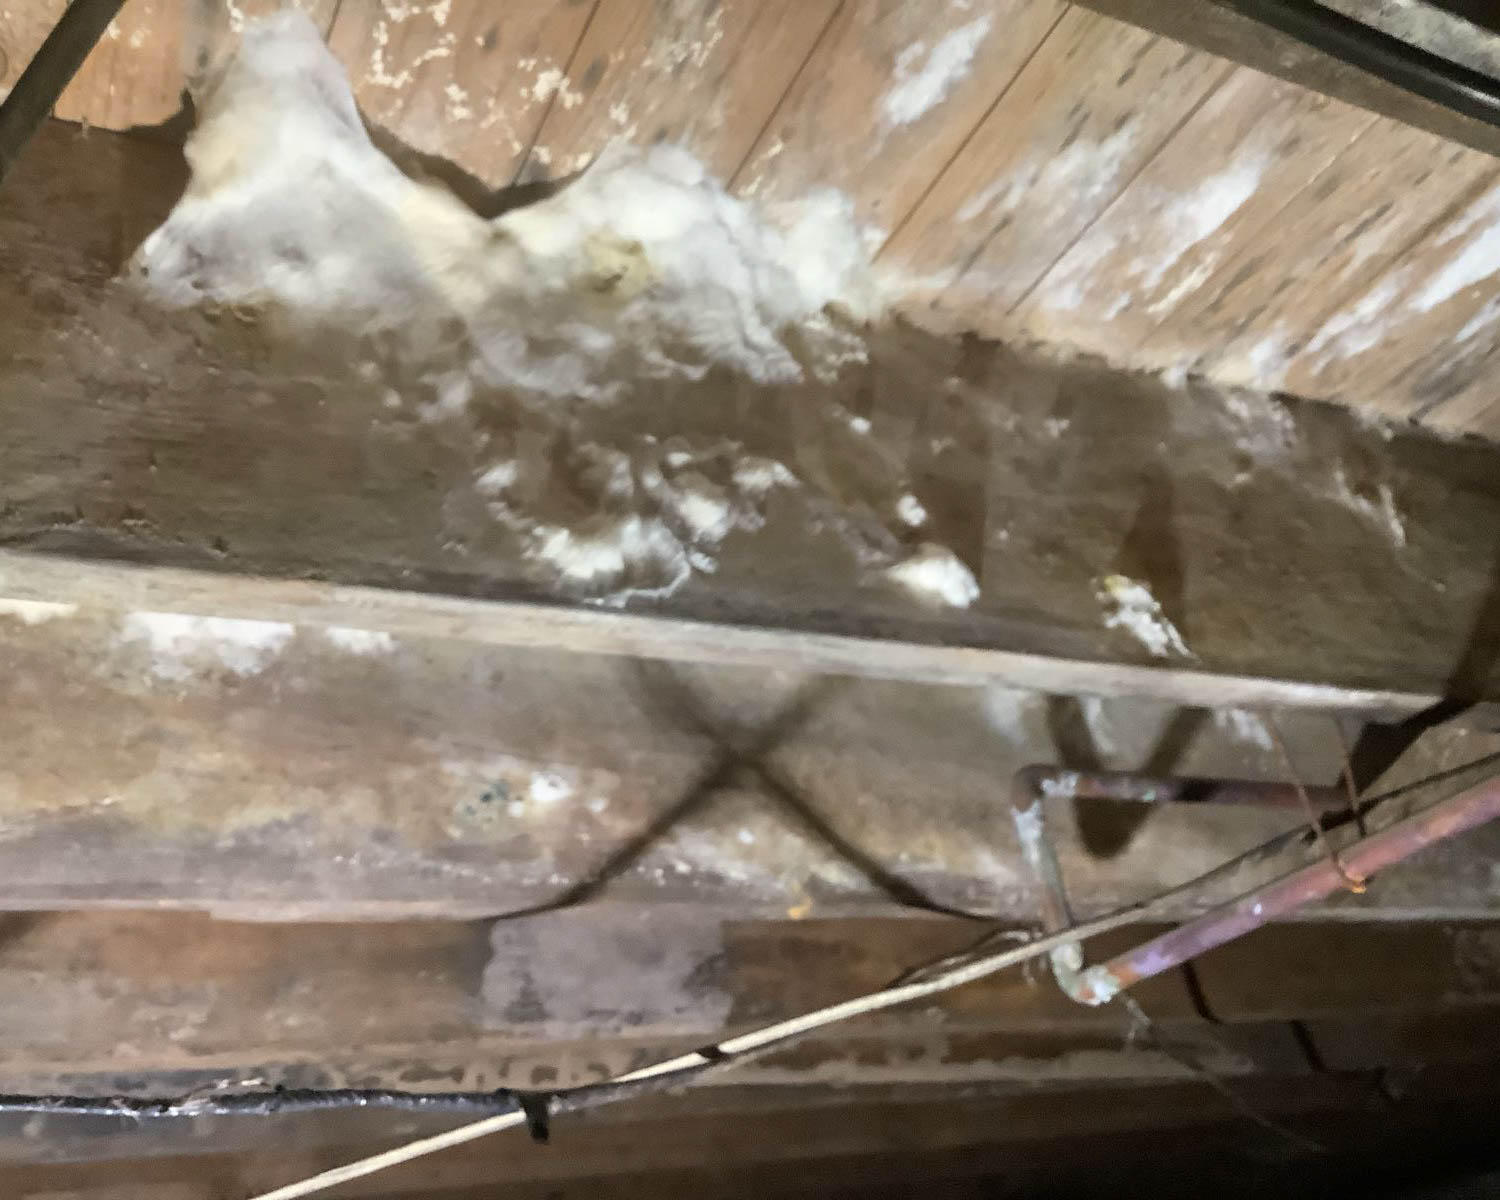 Mold is more likely to grow in unexpected places after water damage. If you ignore the mold, it may spread and continue to grow. SERVPRO of  North East Chester County is your best choice for all of your mold cleanup and remediation needs in Kimberton, PA. Give us a call today!